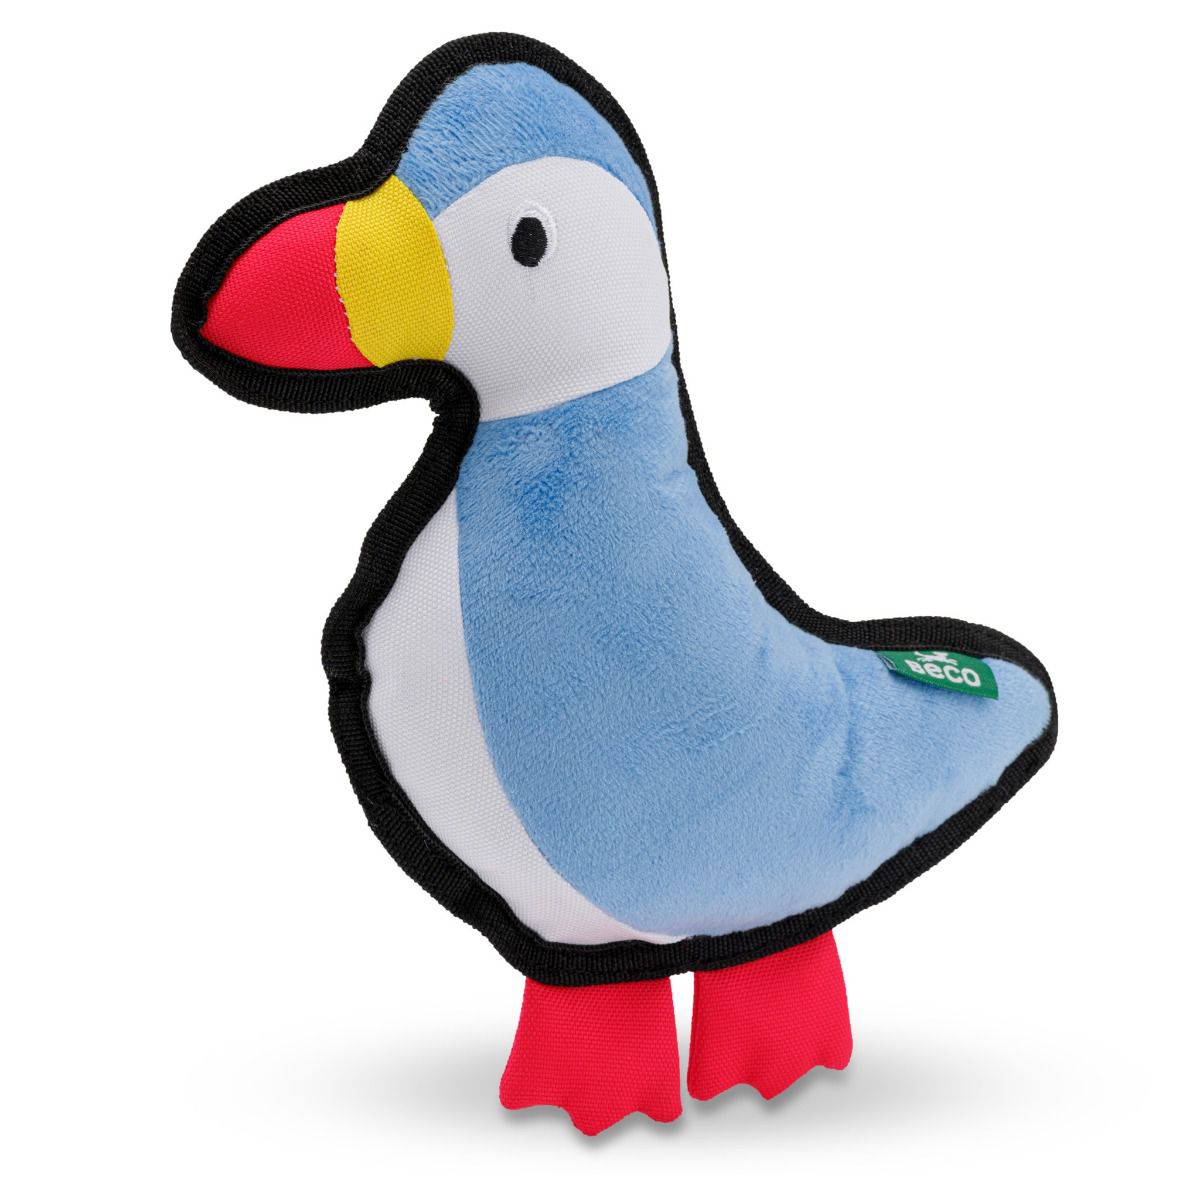 Afbeelding Knuffel Hond – Beco Plush Toy Puffin